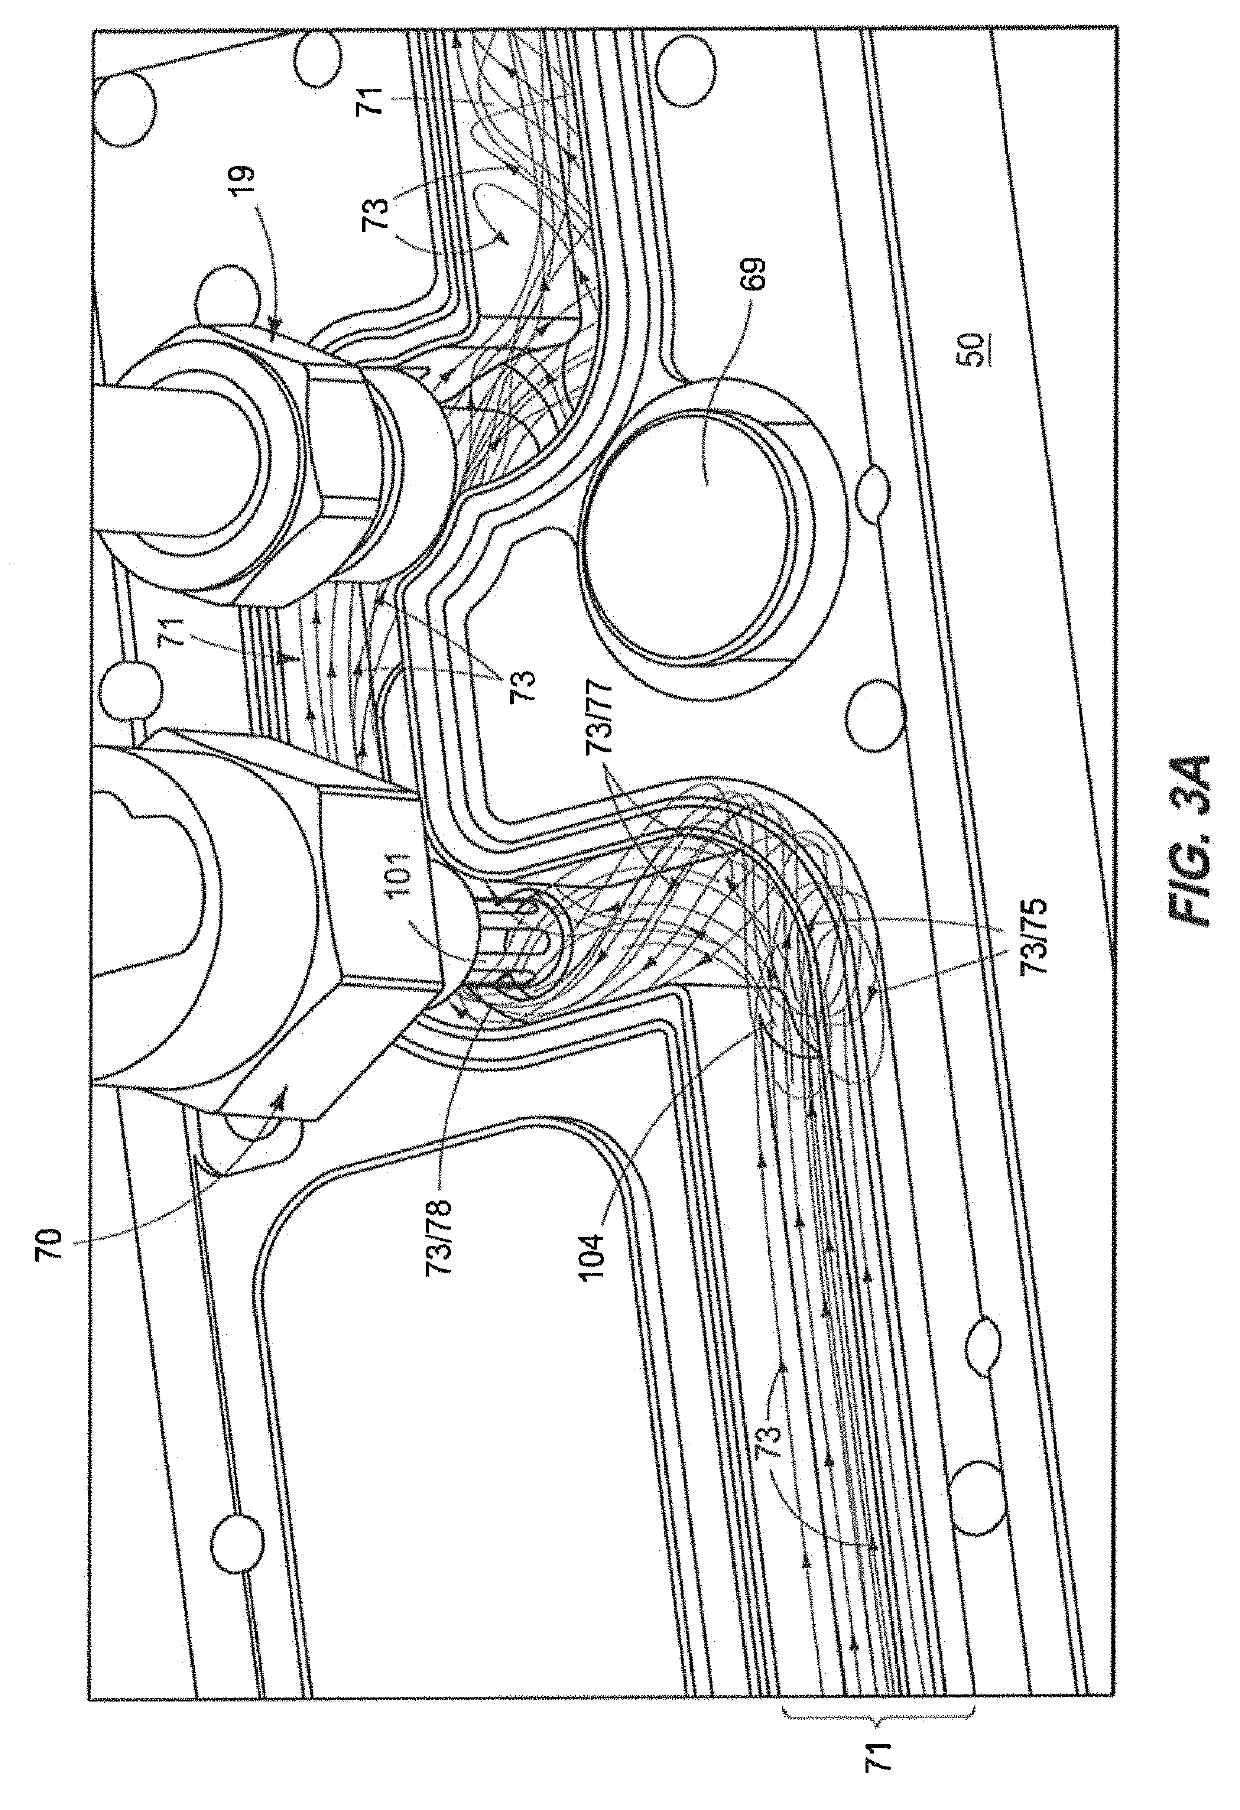 Fluid monitoring and management devices, fluid monitoring and management systems, and fluid monitoring and management methods